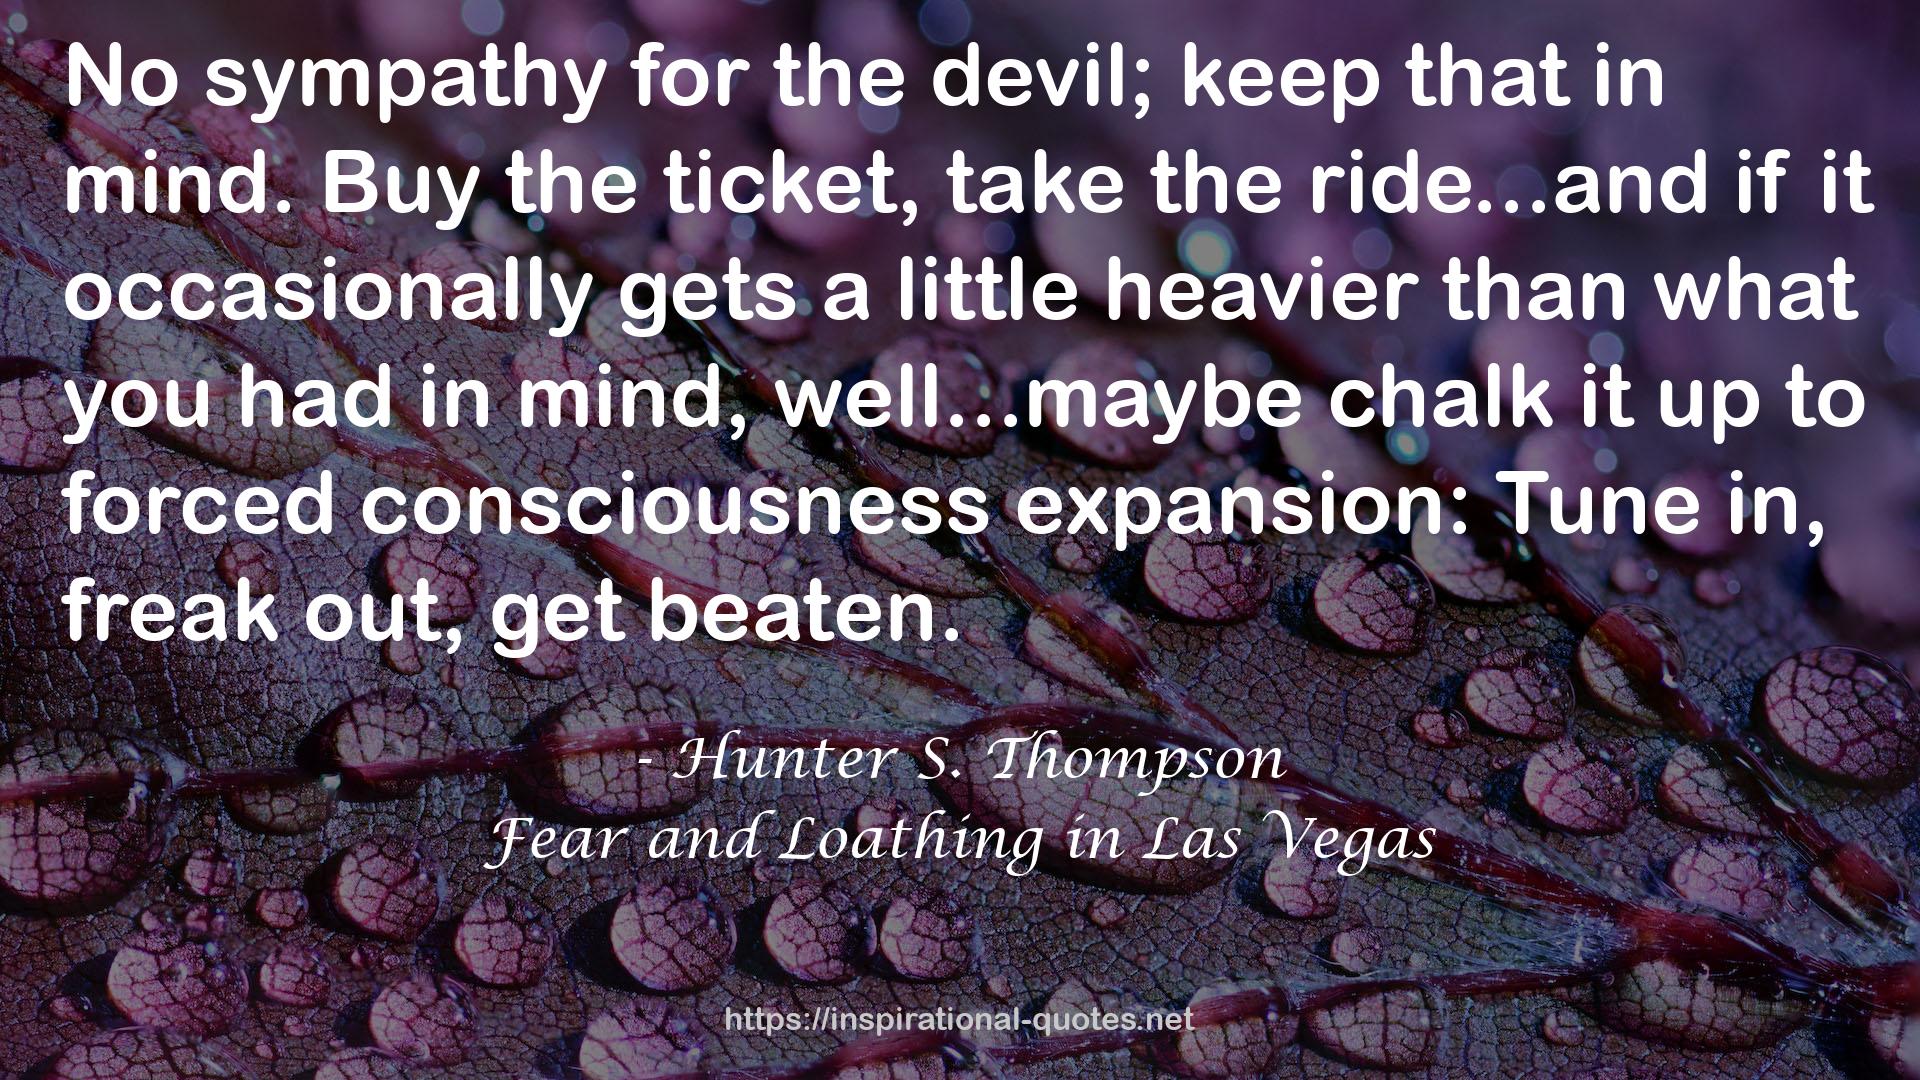 Fear and Loathing in Las Vegas QUOTES